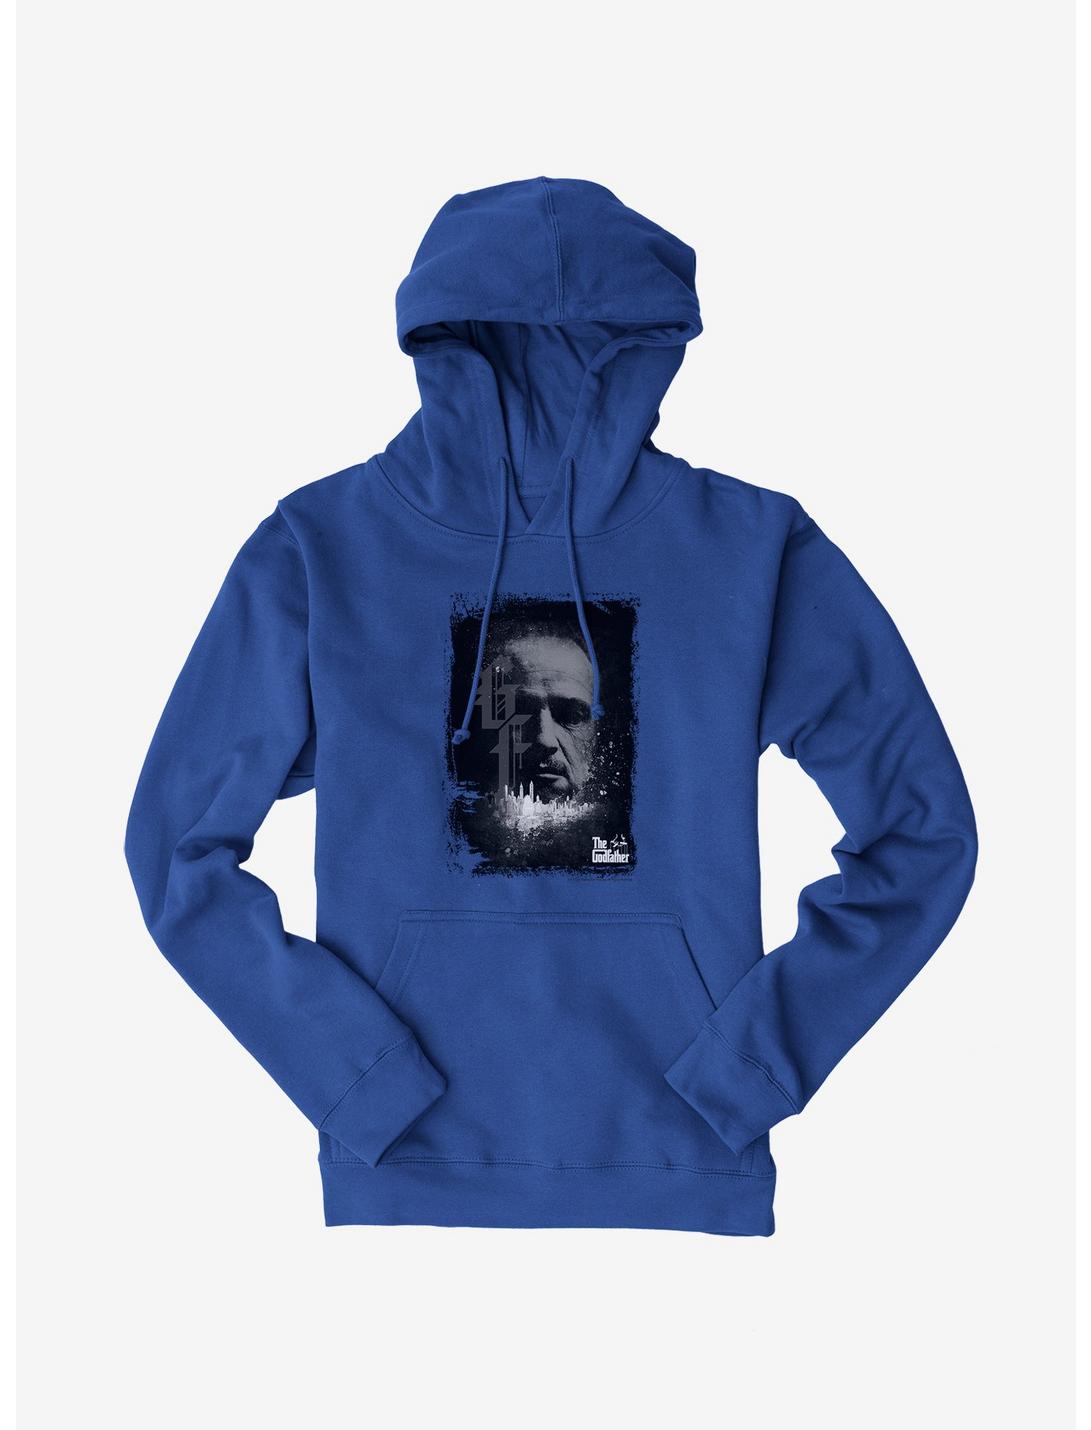 The Godfather Don Corleone NYC Hoodie, , hi-res